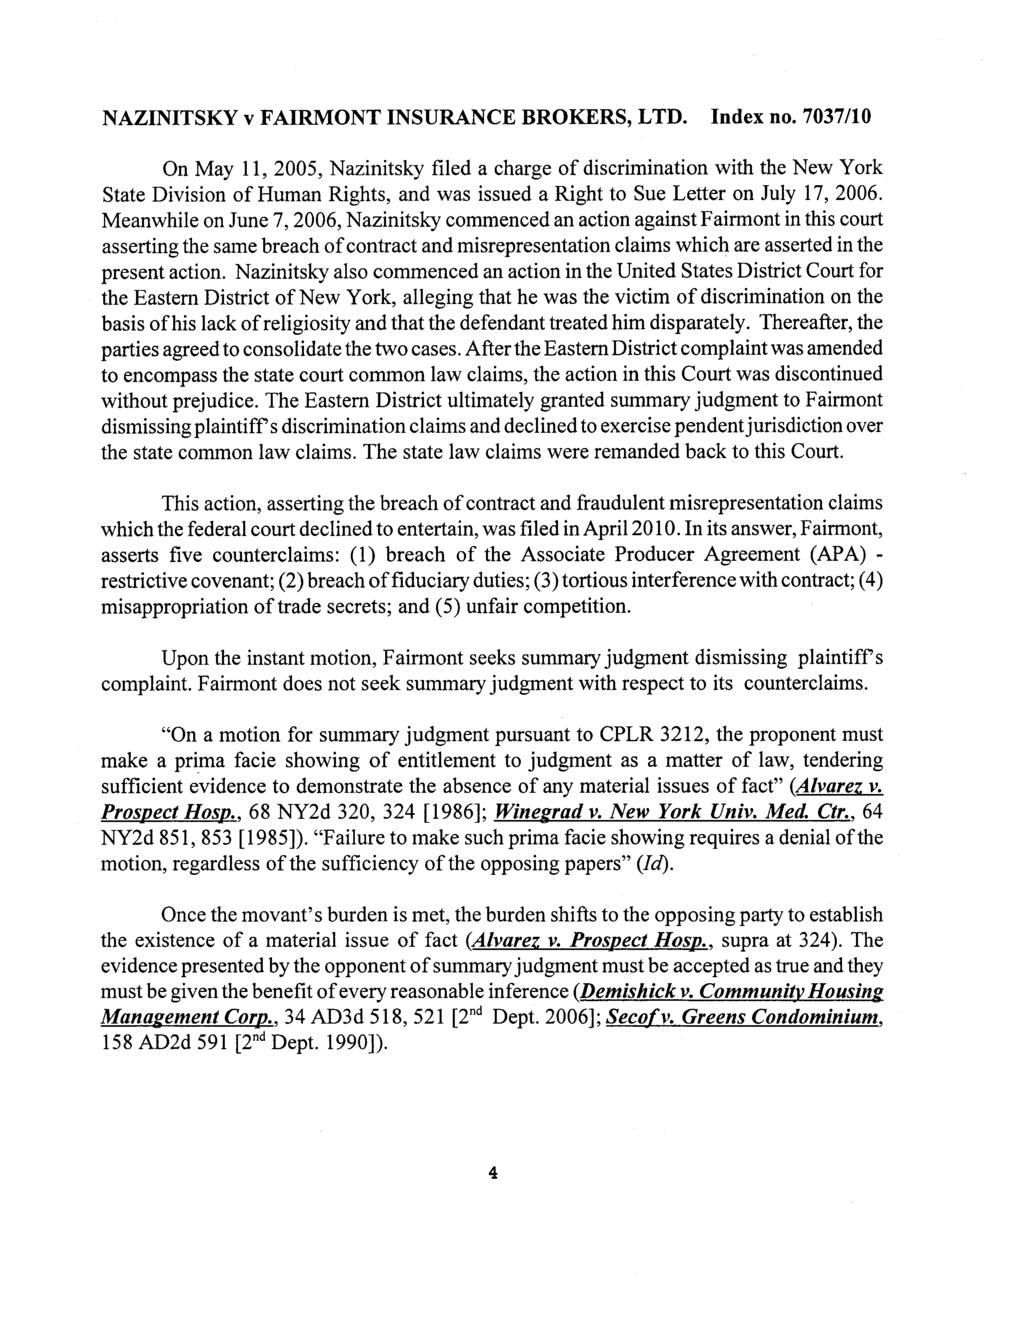 [* 4] On May 11, 2005, Nazinitsky fied a charge of discrimination with the New York State Division of Human Rights, and was issued a Right to Sue Letter on July 17, 2006.